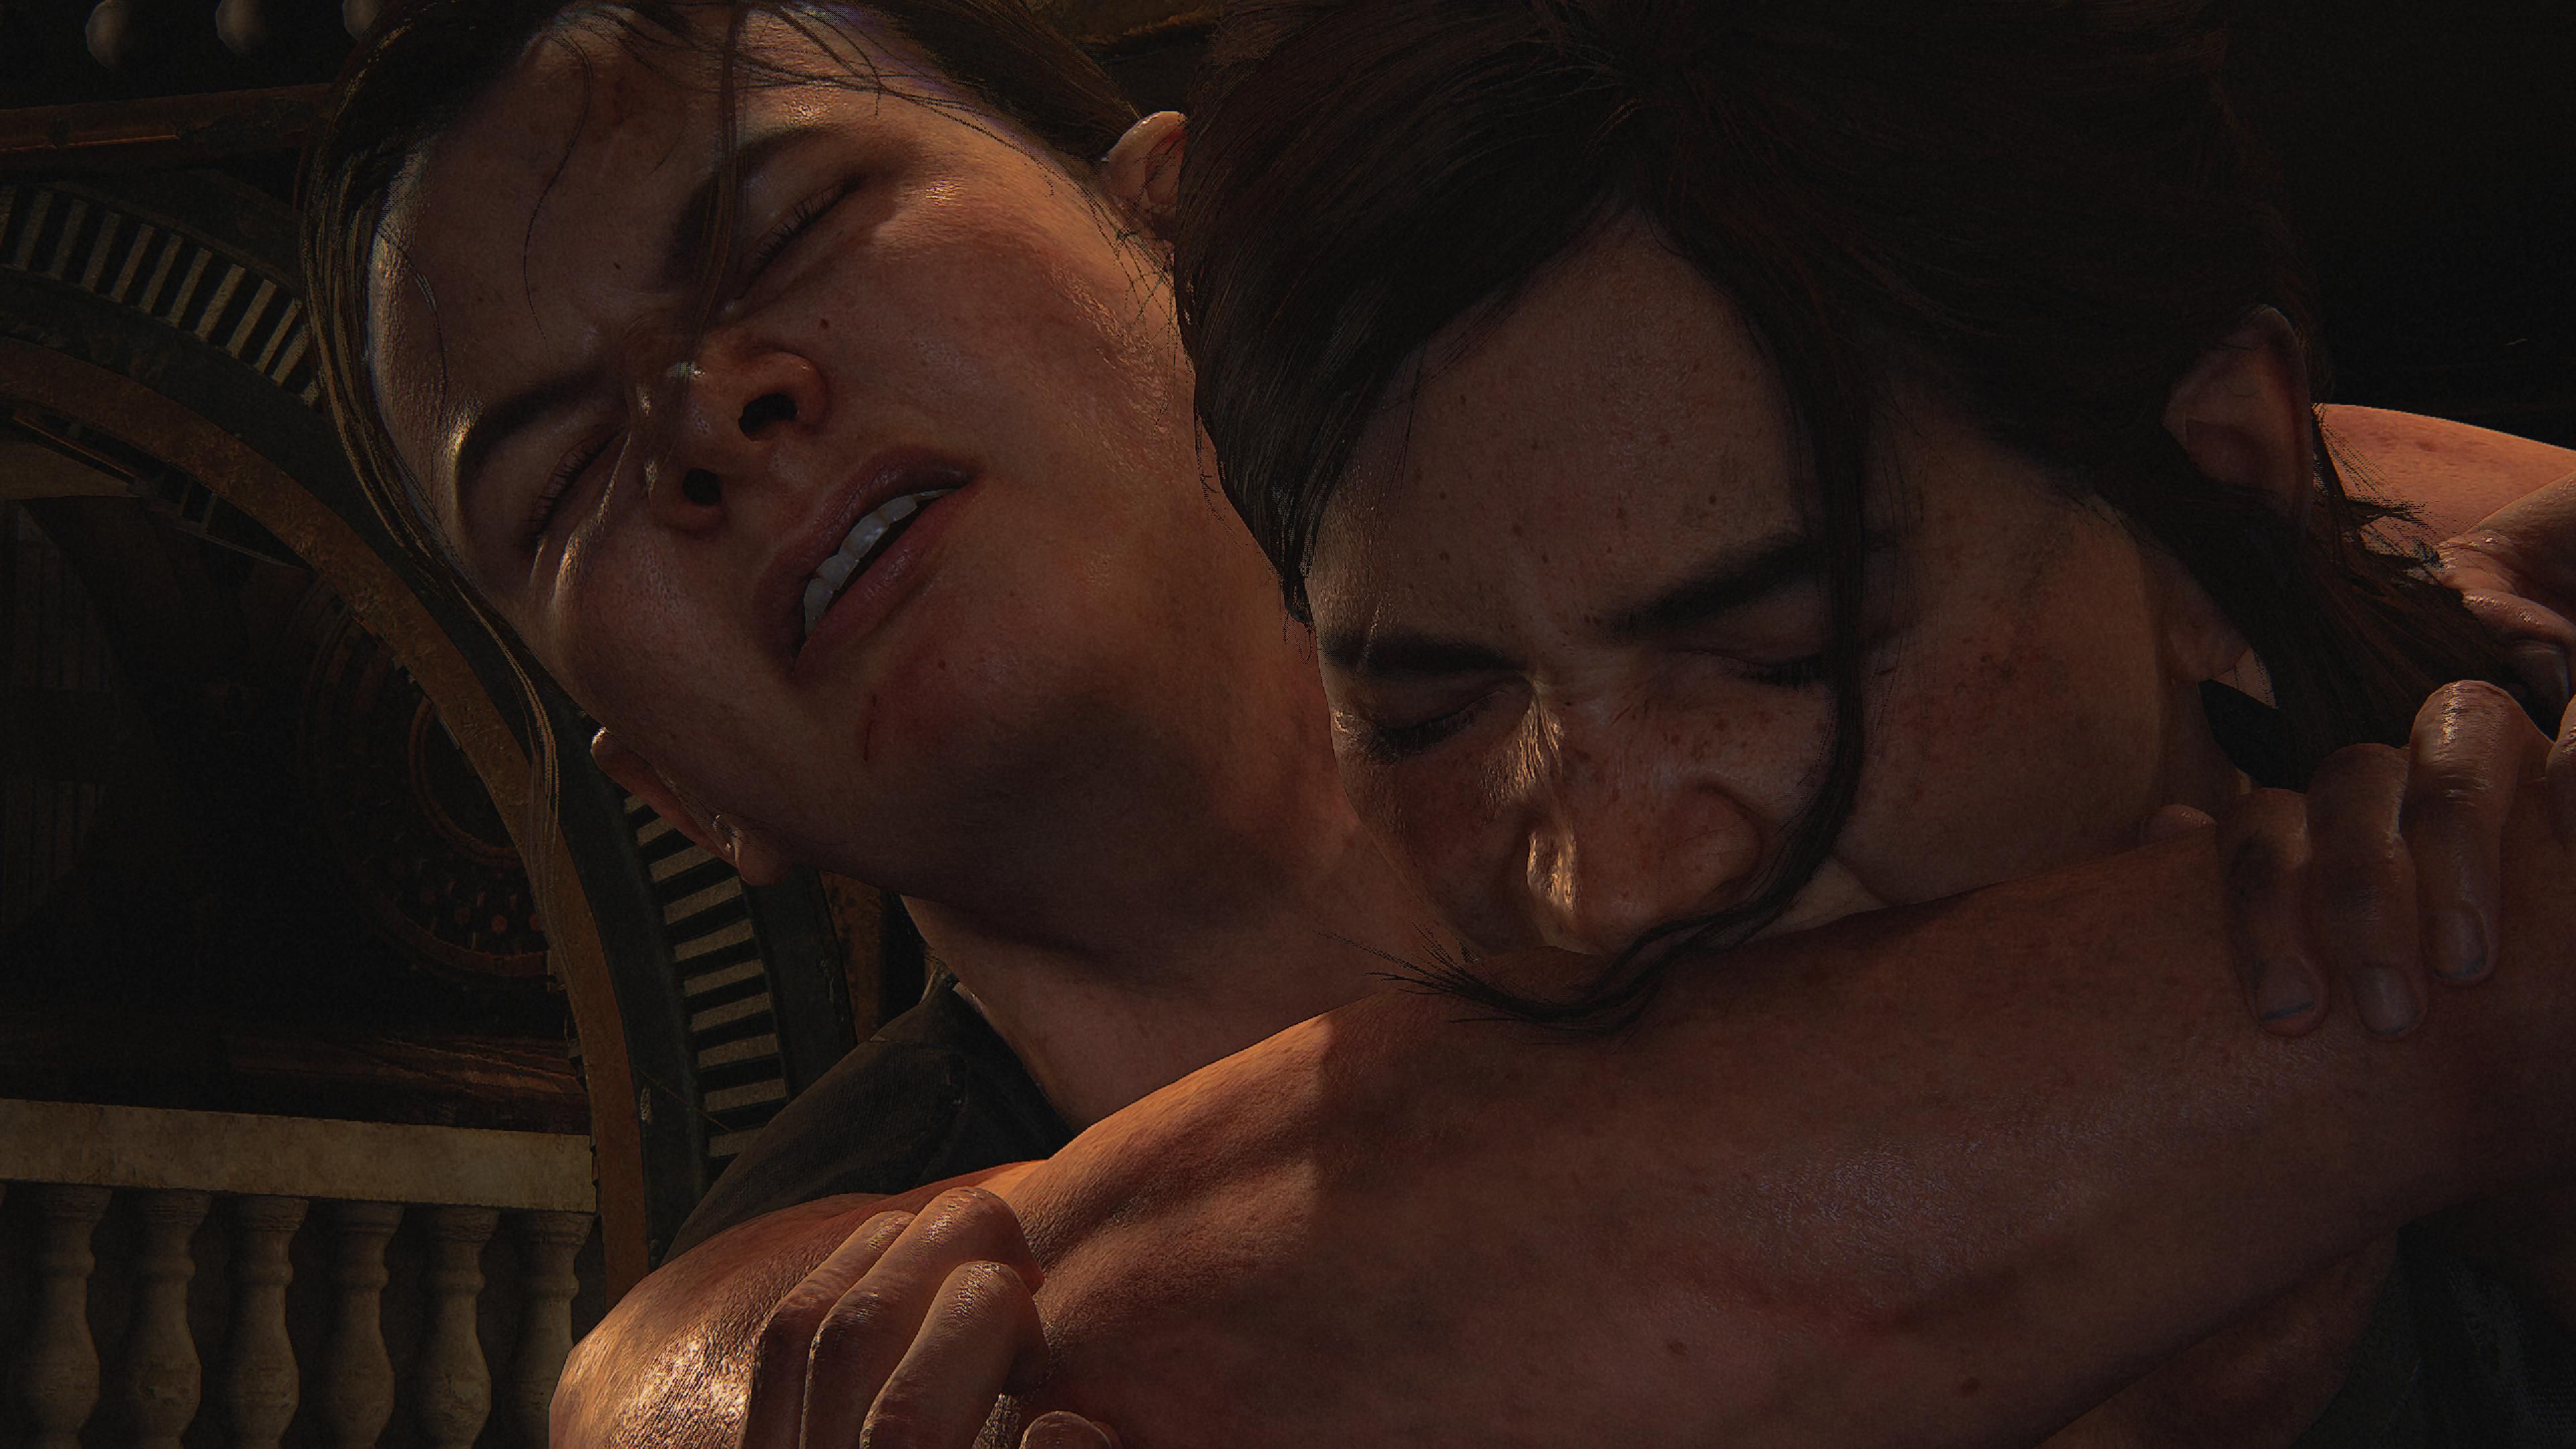 Ellie biting Abby The Last Of Us Part 2